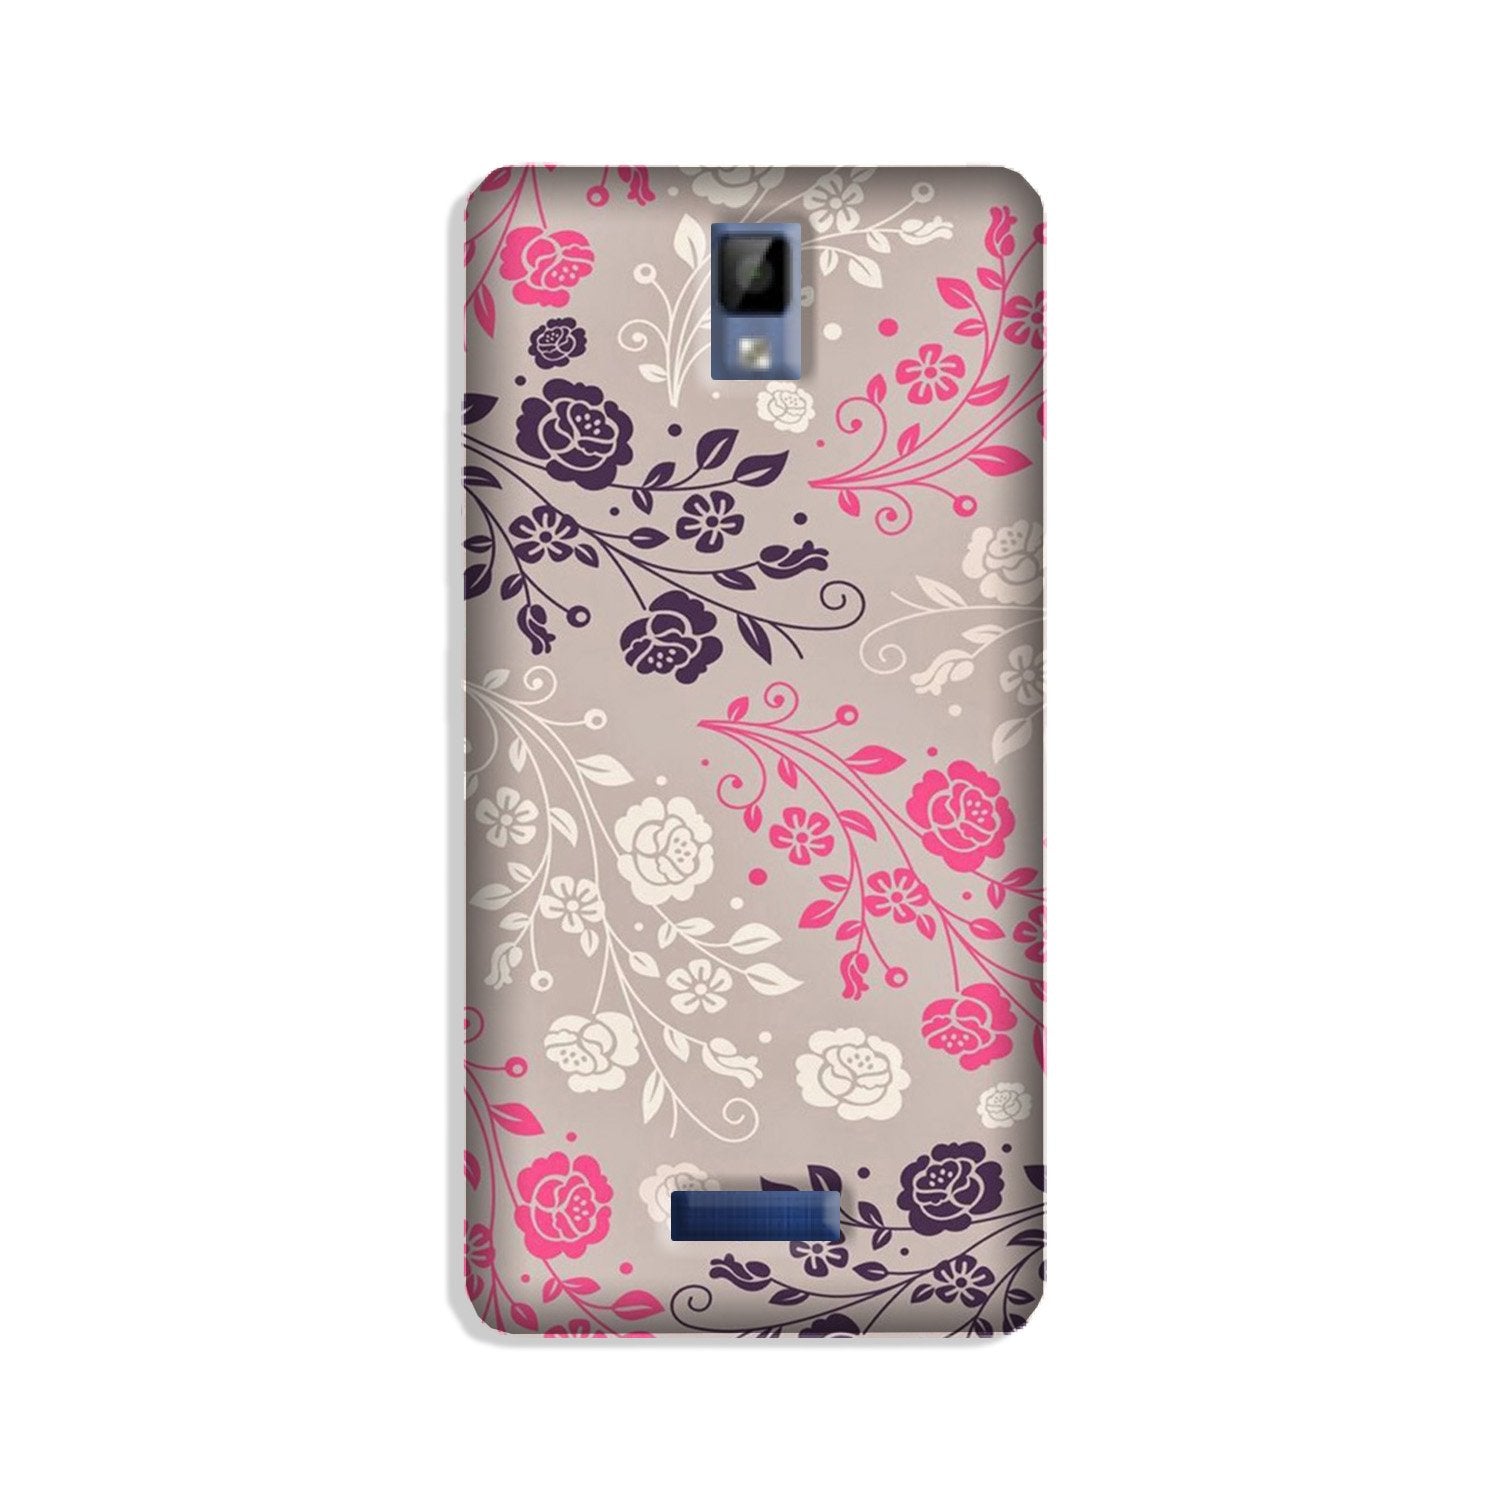 Pattern2 Case for Gionee P7